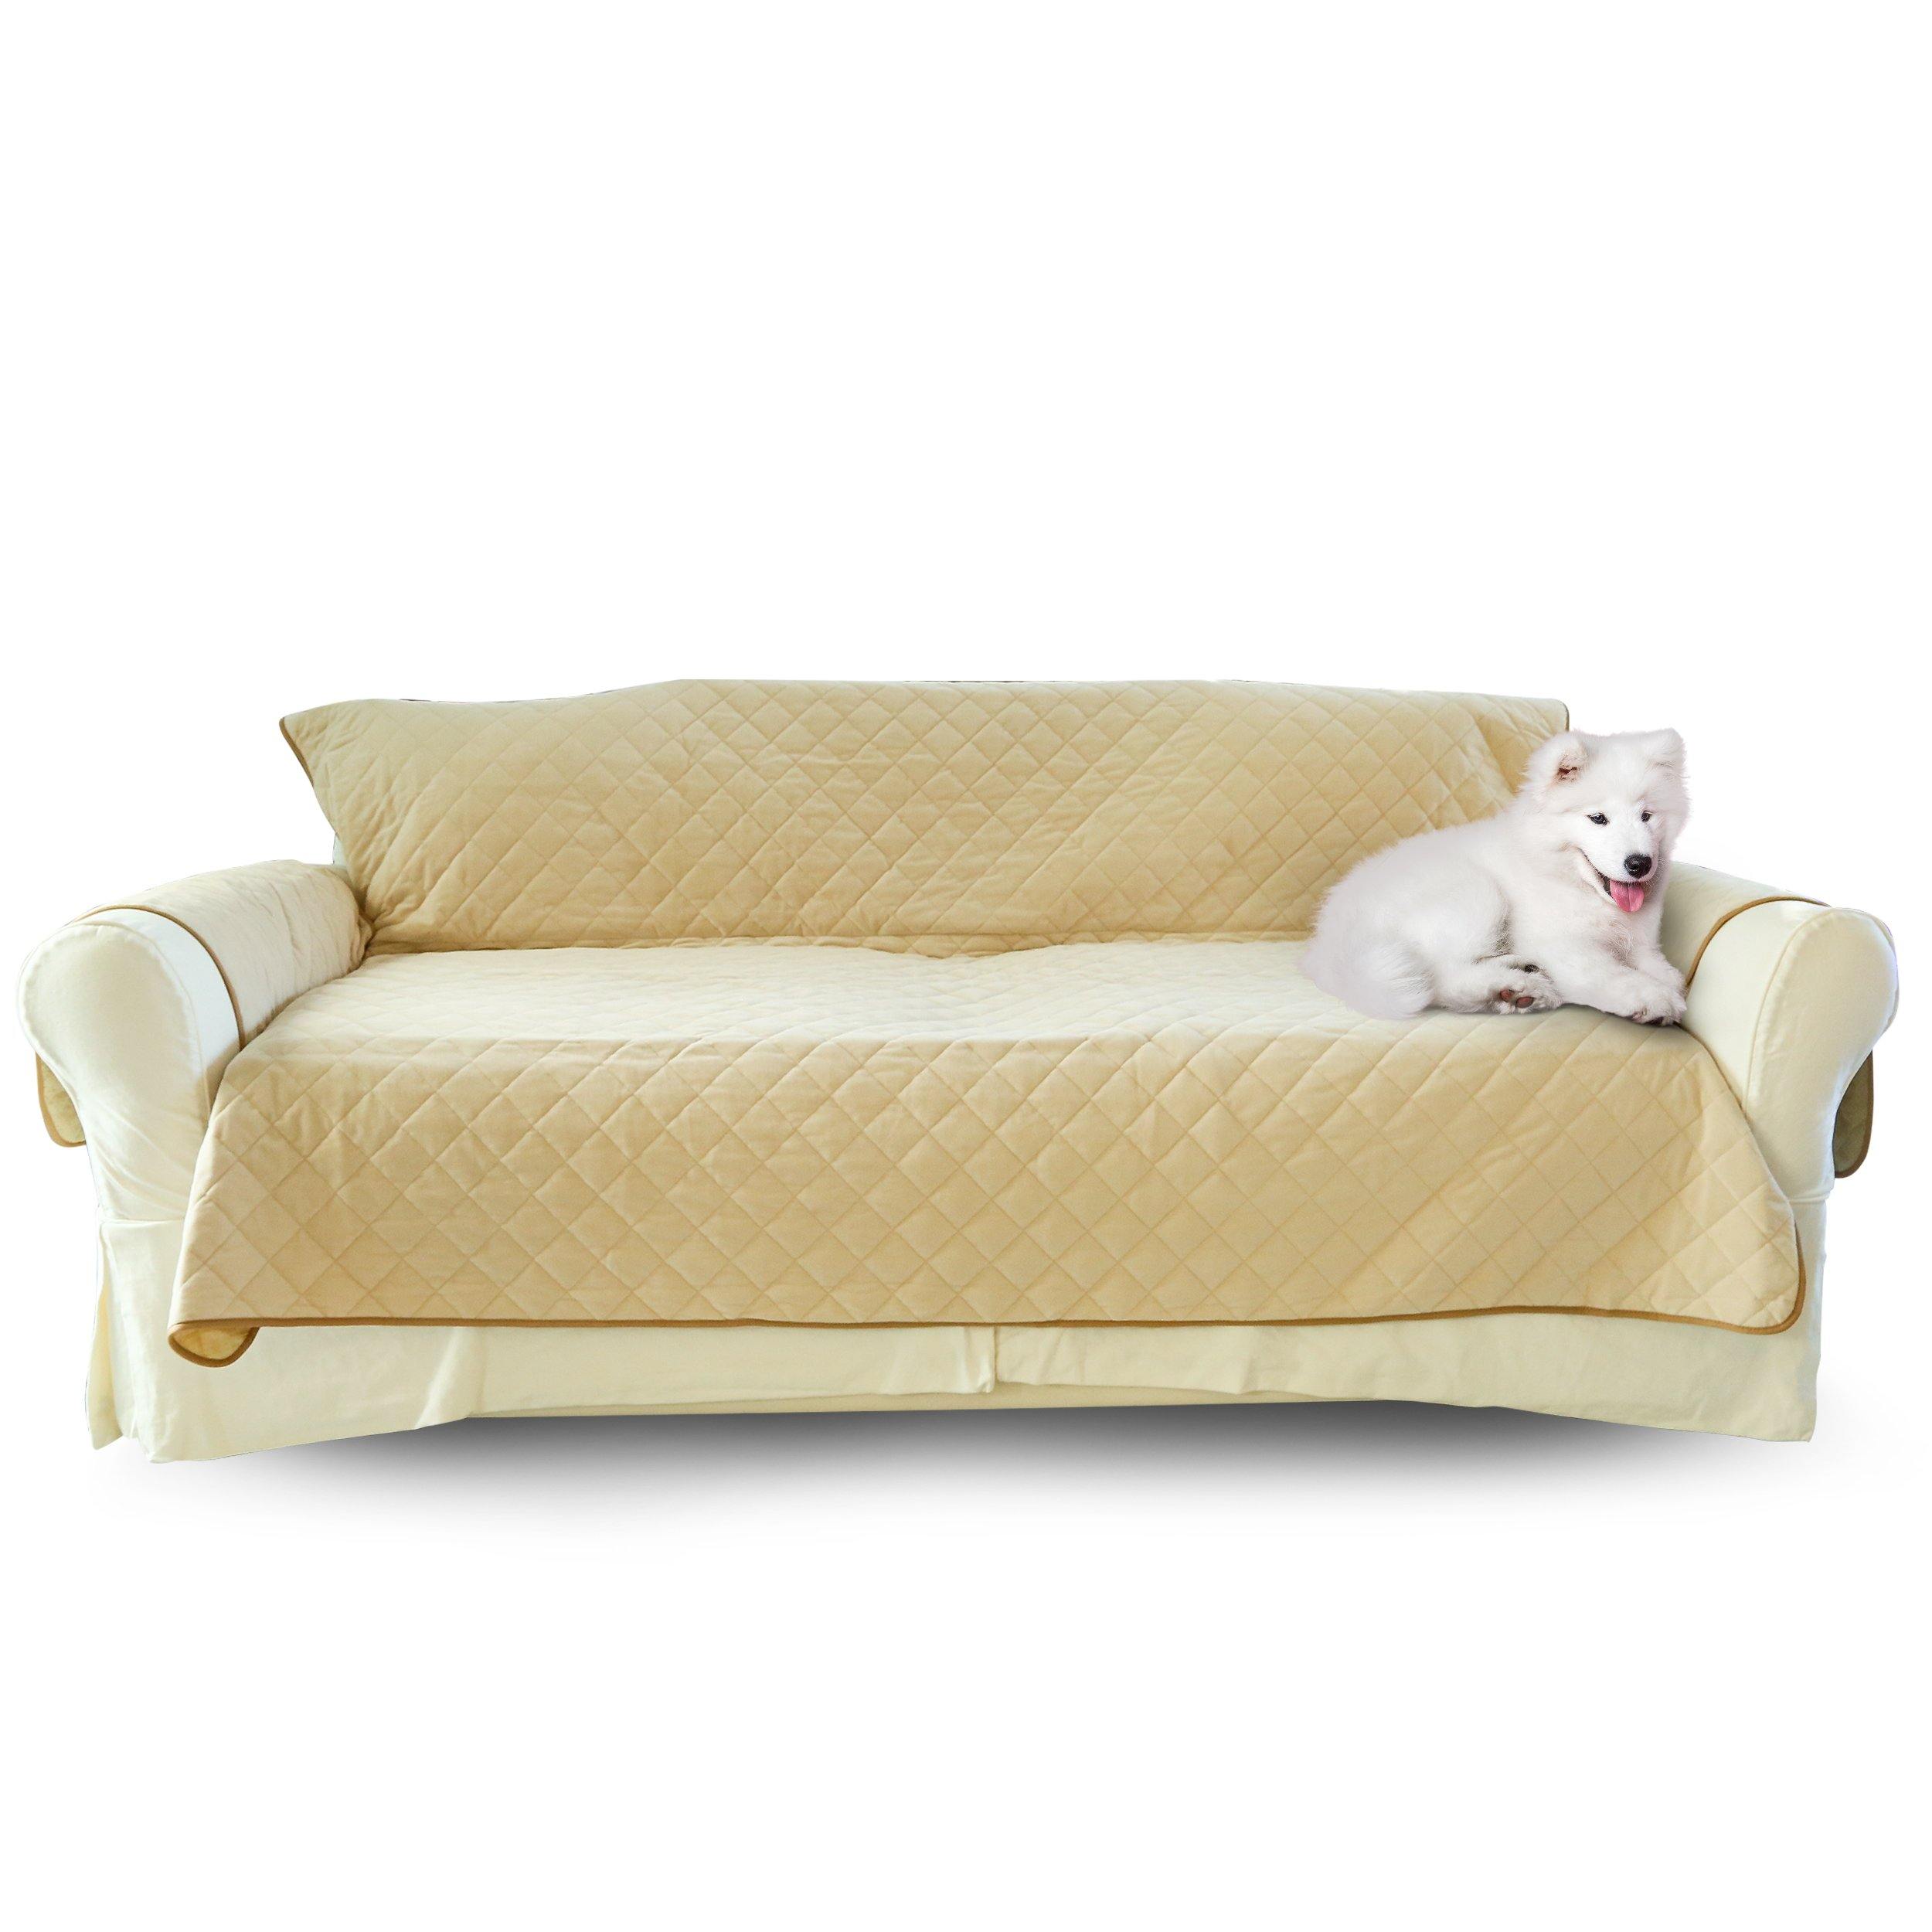 Sofa Ruby Elegant Comfort Jersey Luxury Featuring Super Soft Pet Dog Furniture Protector Fitted Couch Slipcover